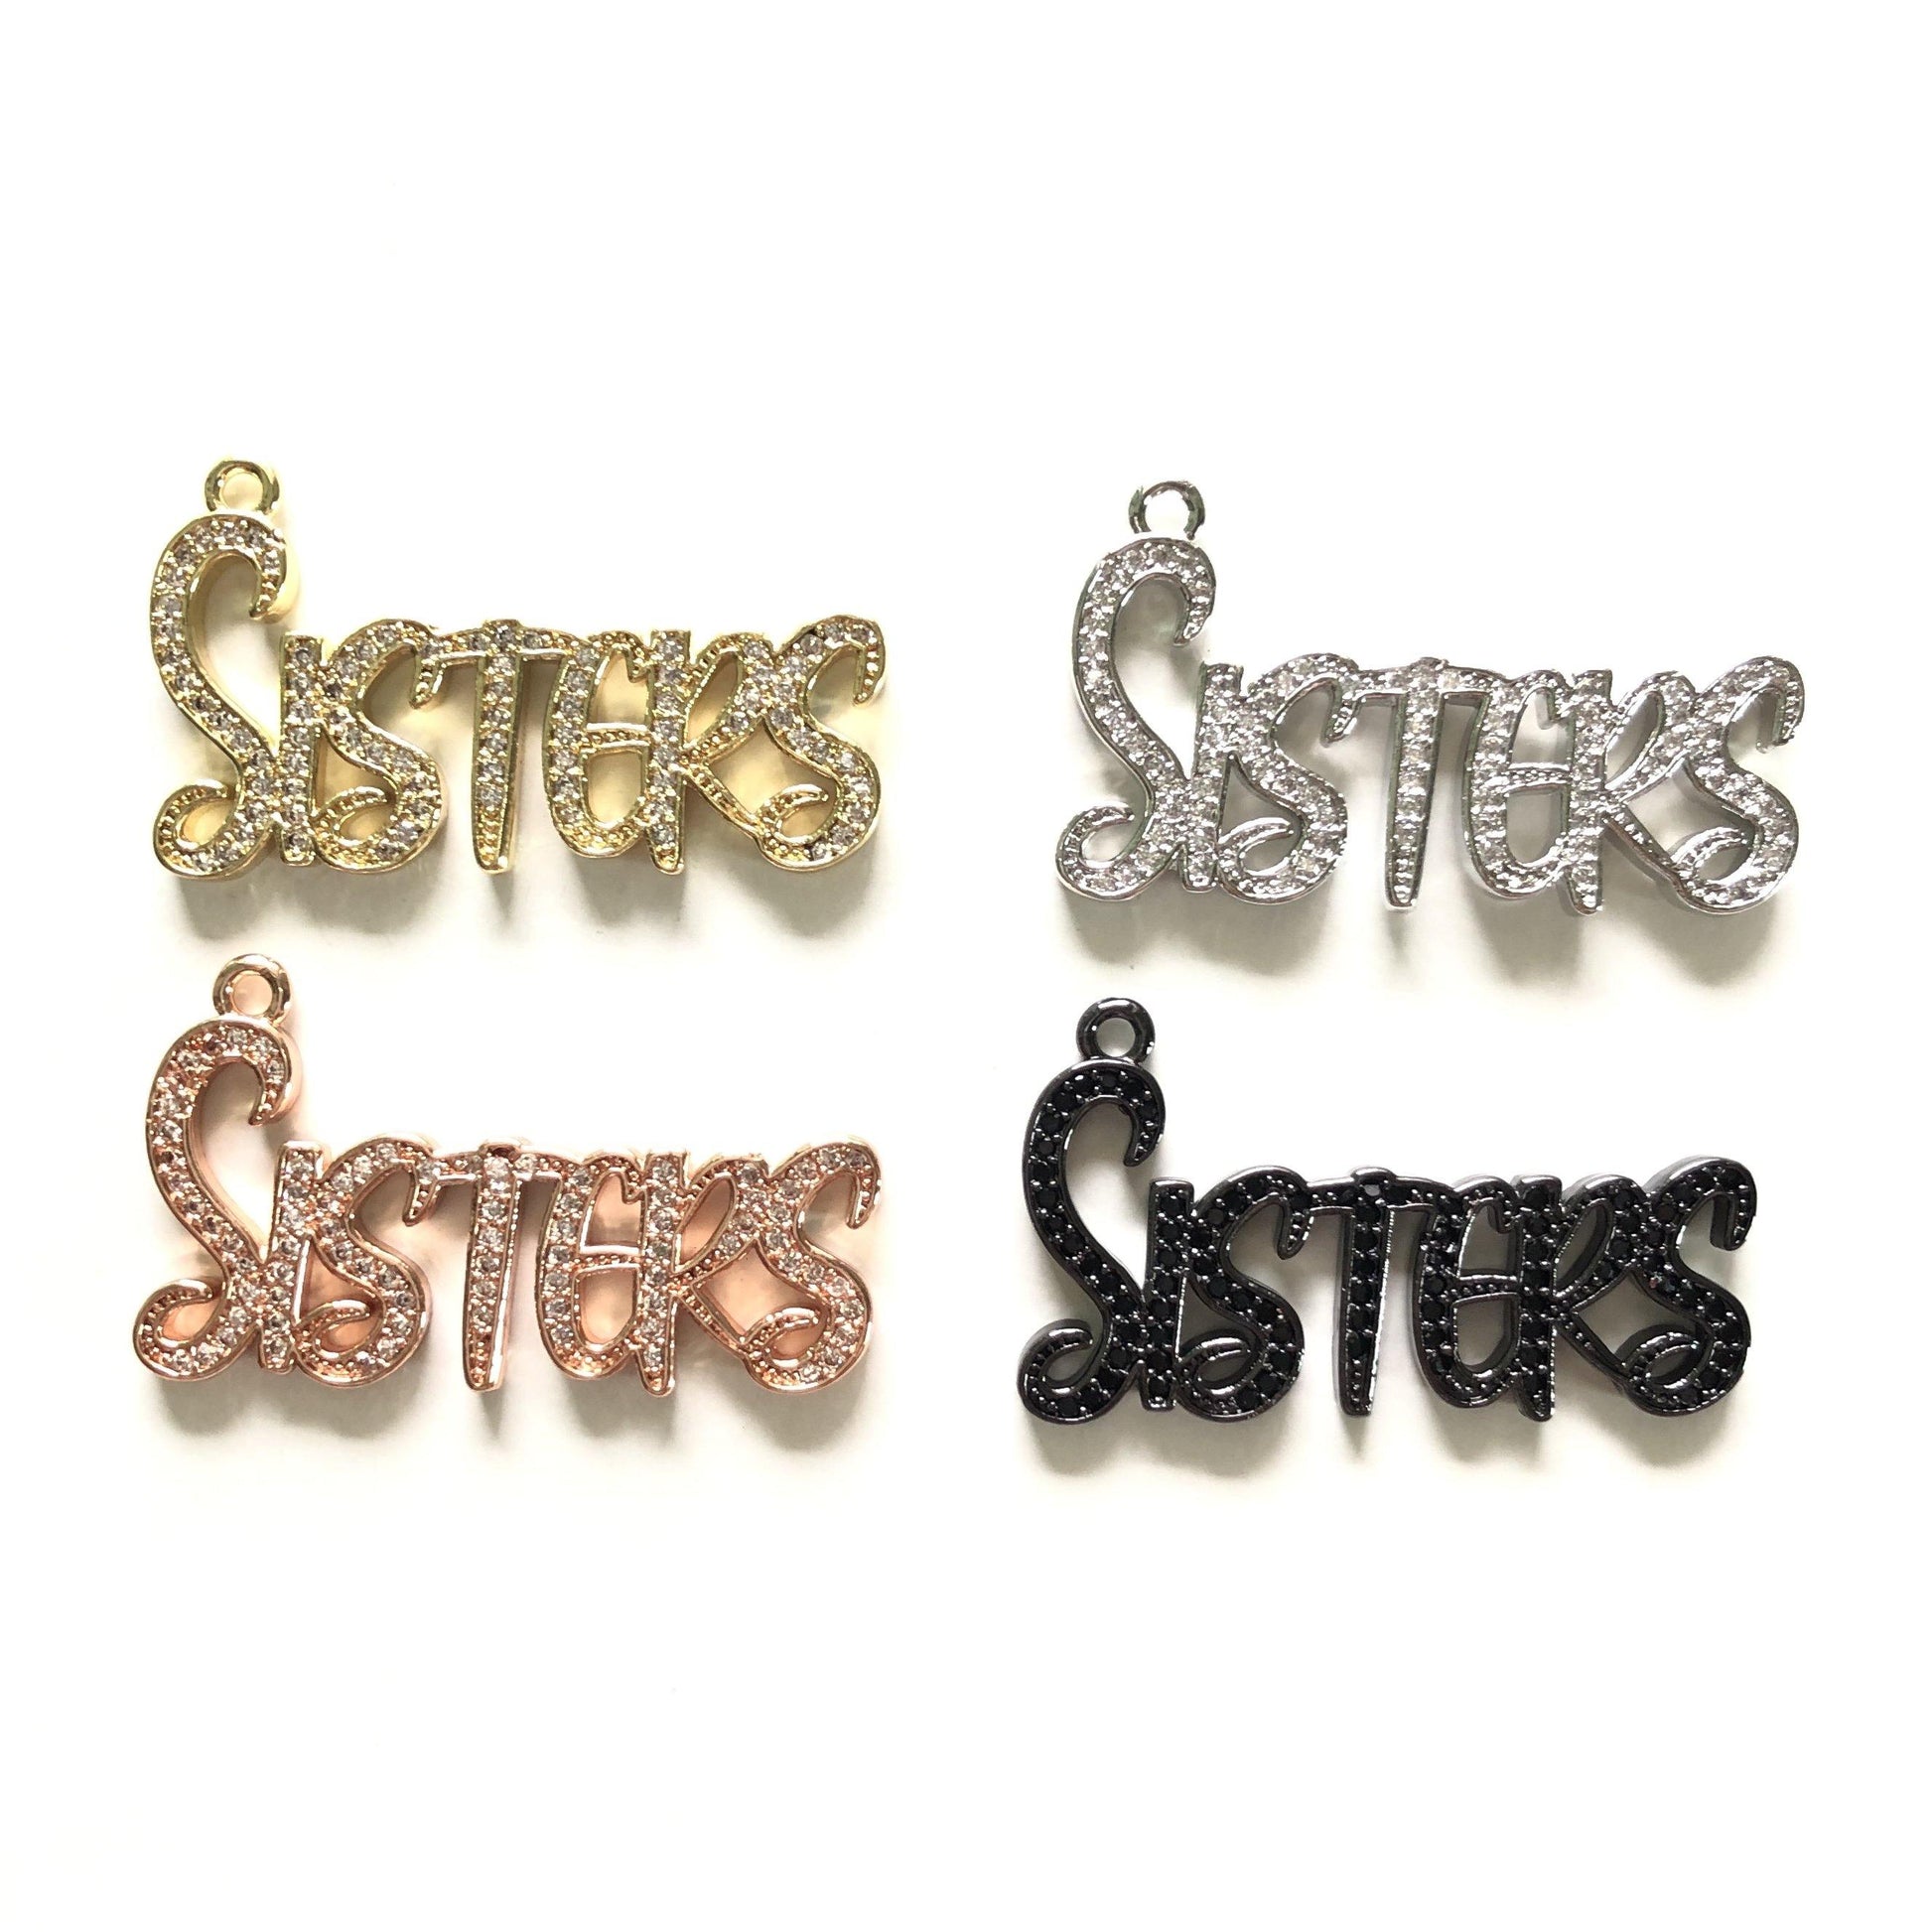 10pcs/lot 34.5*20mm CZ Paved Sisters Charms CZ Paved Charms Words & Quotes Charms Beads Beyond